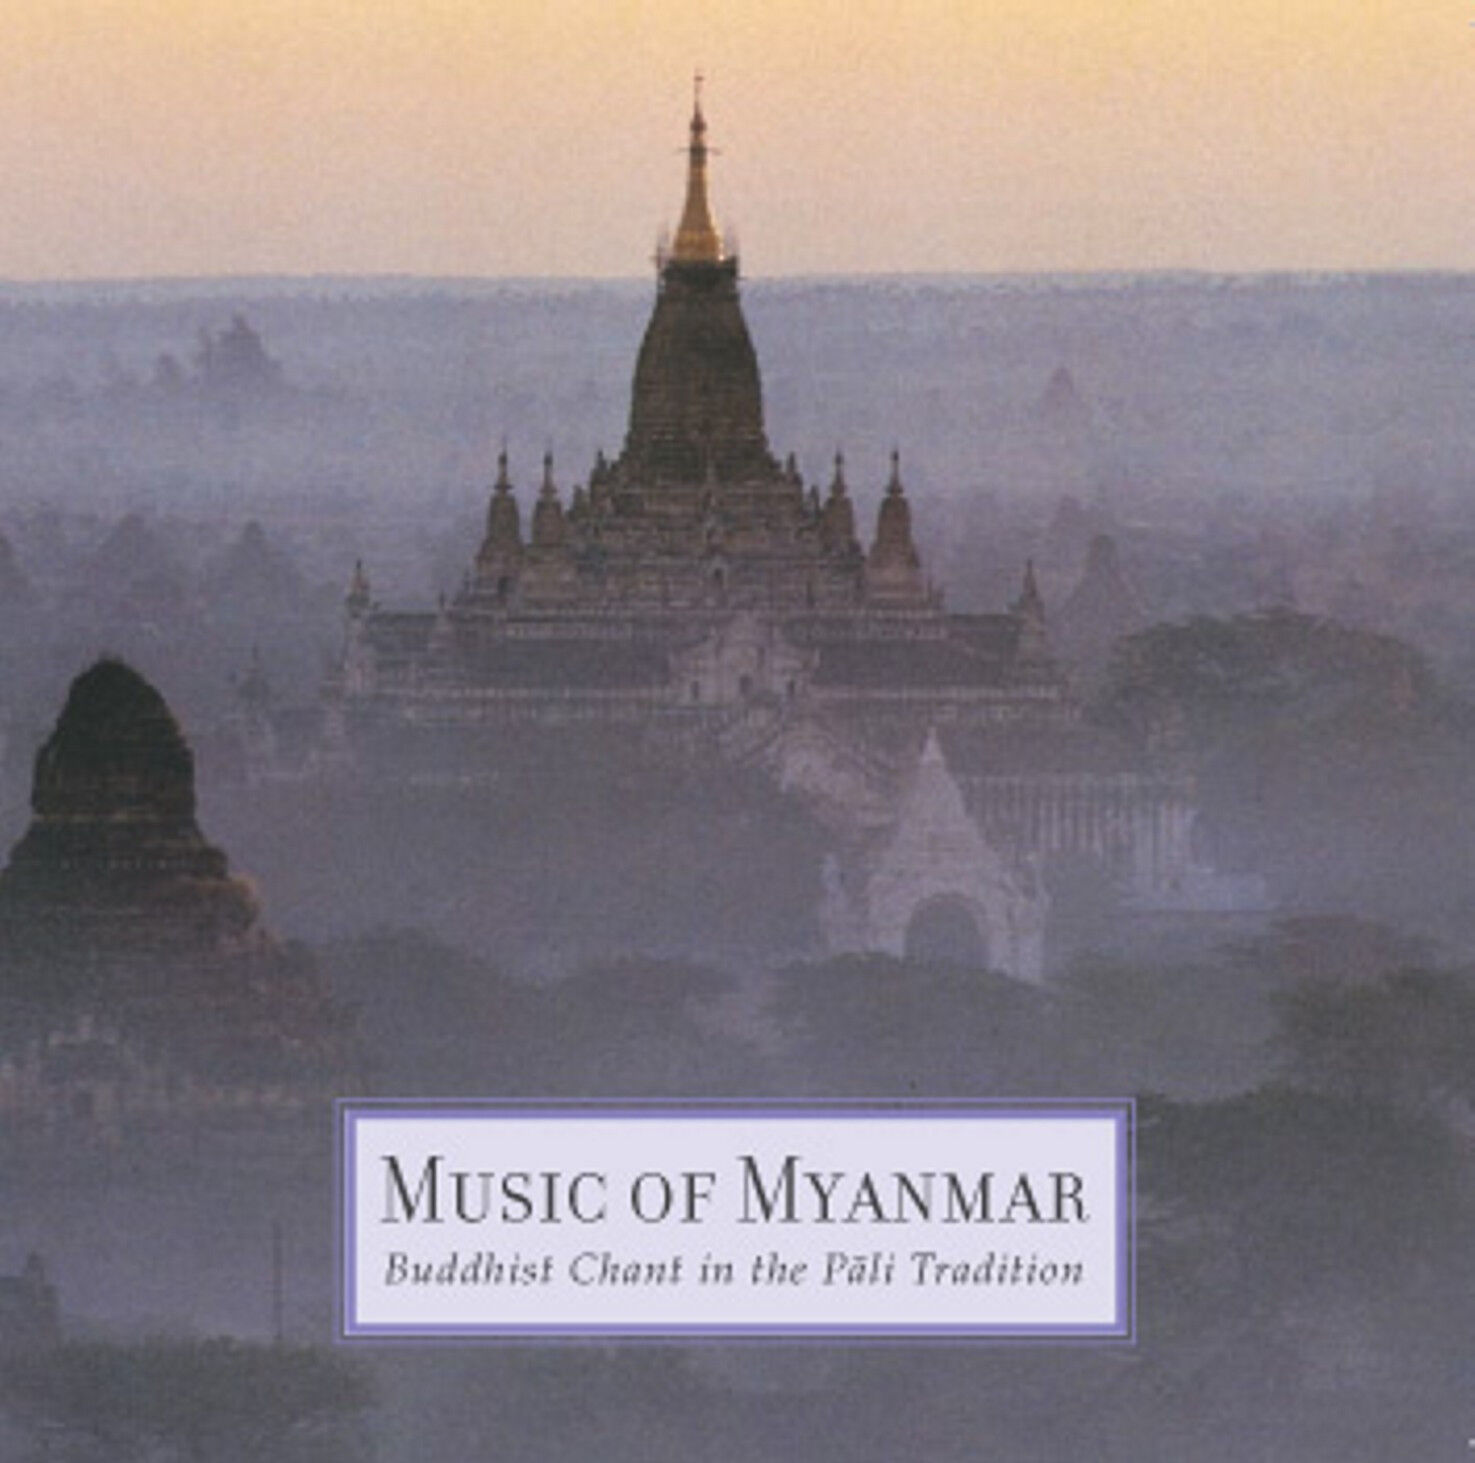 MUSIC OF MYANMAR: BUDDHIST CHANT IN THE PALI TRADITION (2 CD) — VARIOUS ARTISTS